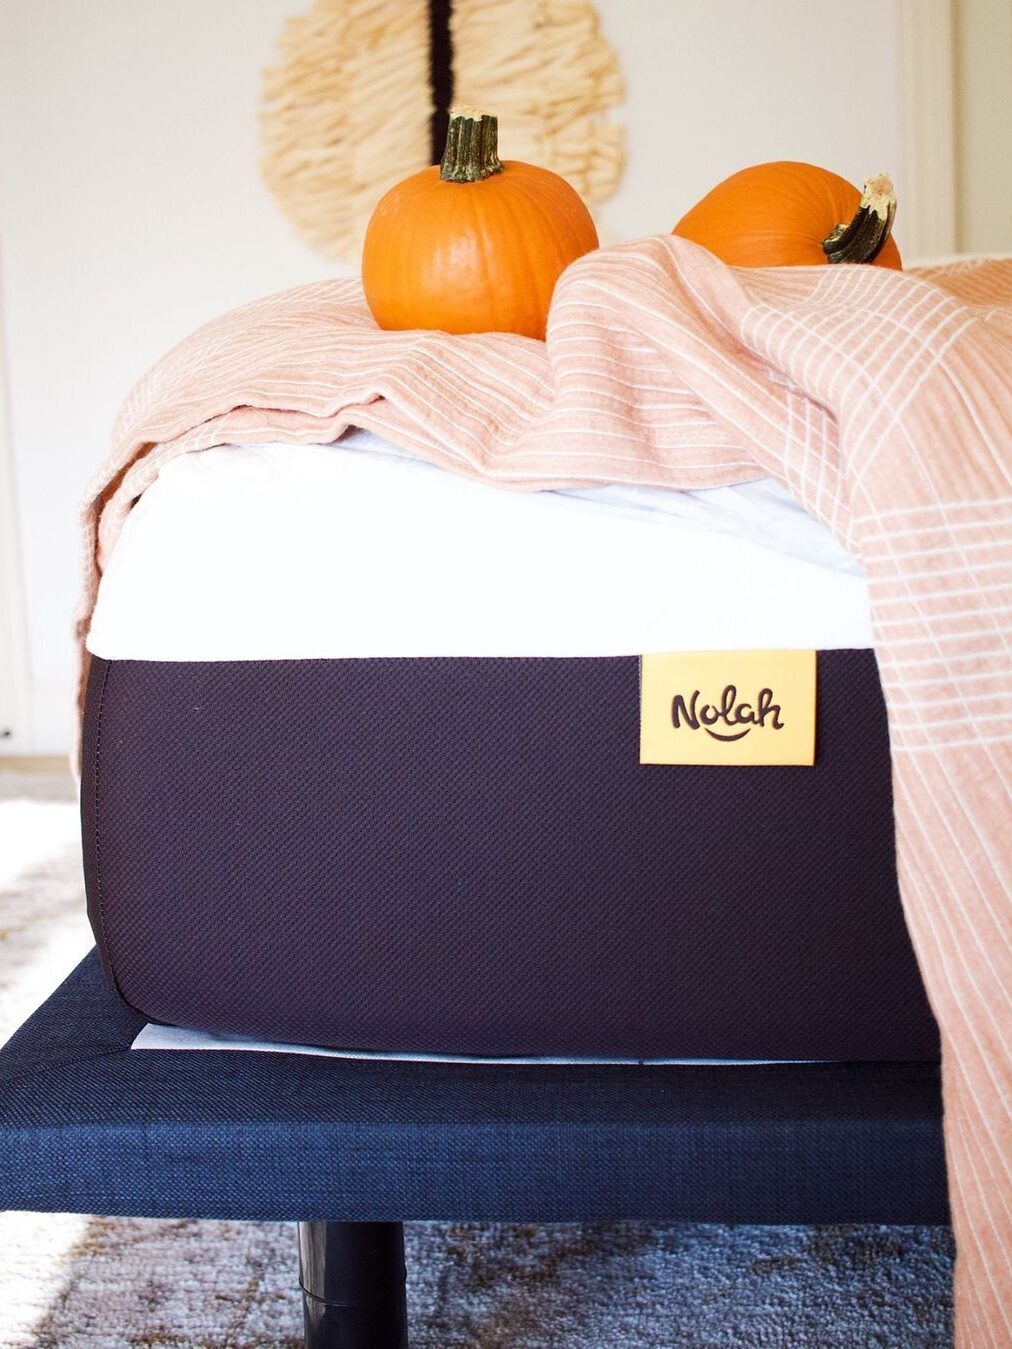 Two pumpkins and a pale red and white striped blanked on a Nolah mattress.